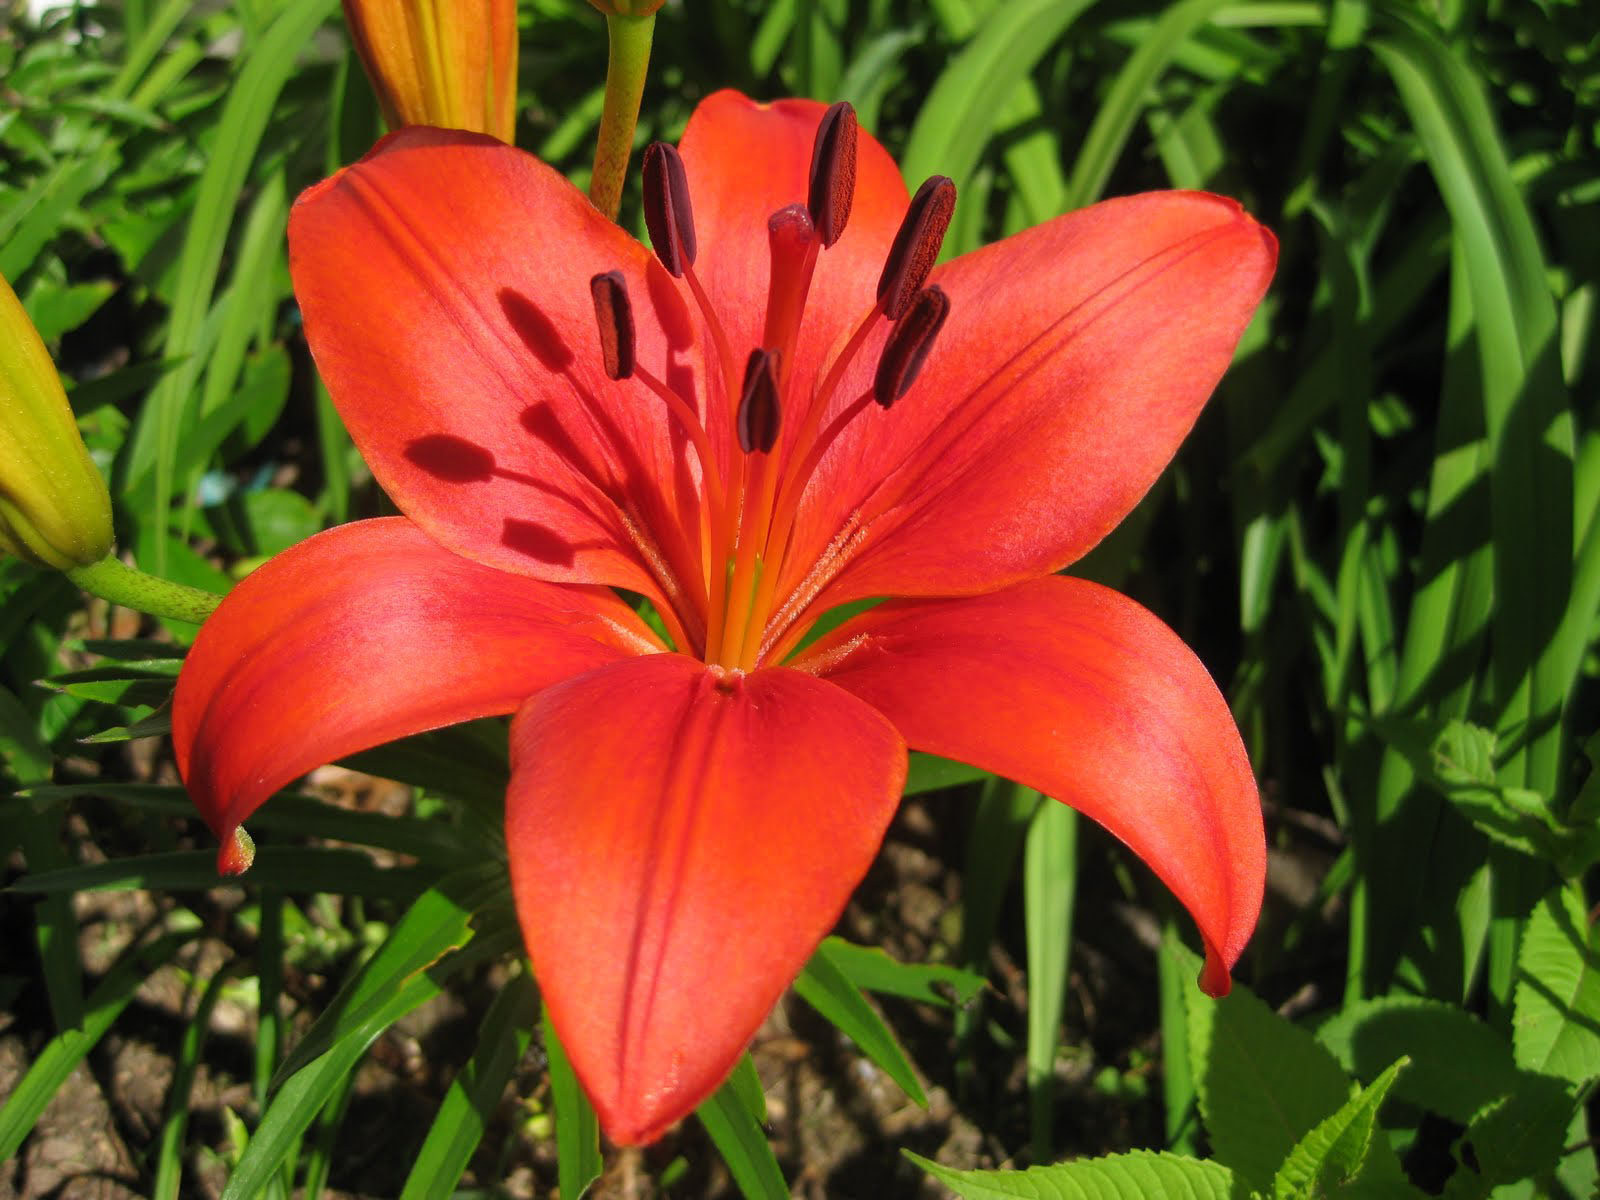 My Asiatic Lily Flowers Wallpaper Image Photos And Pictures For